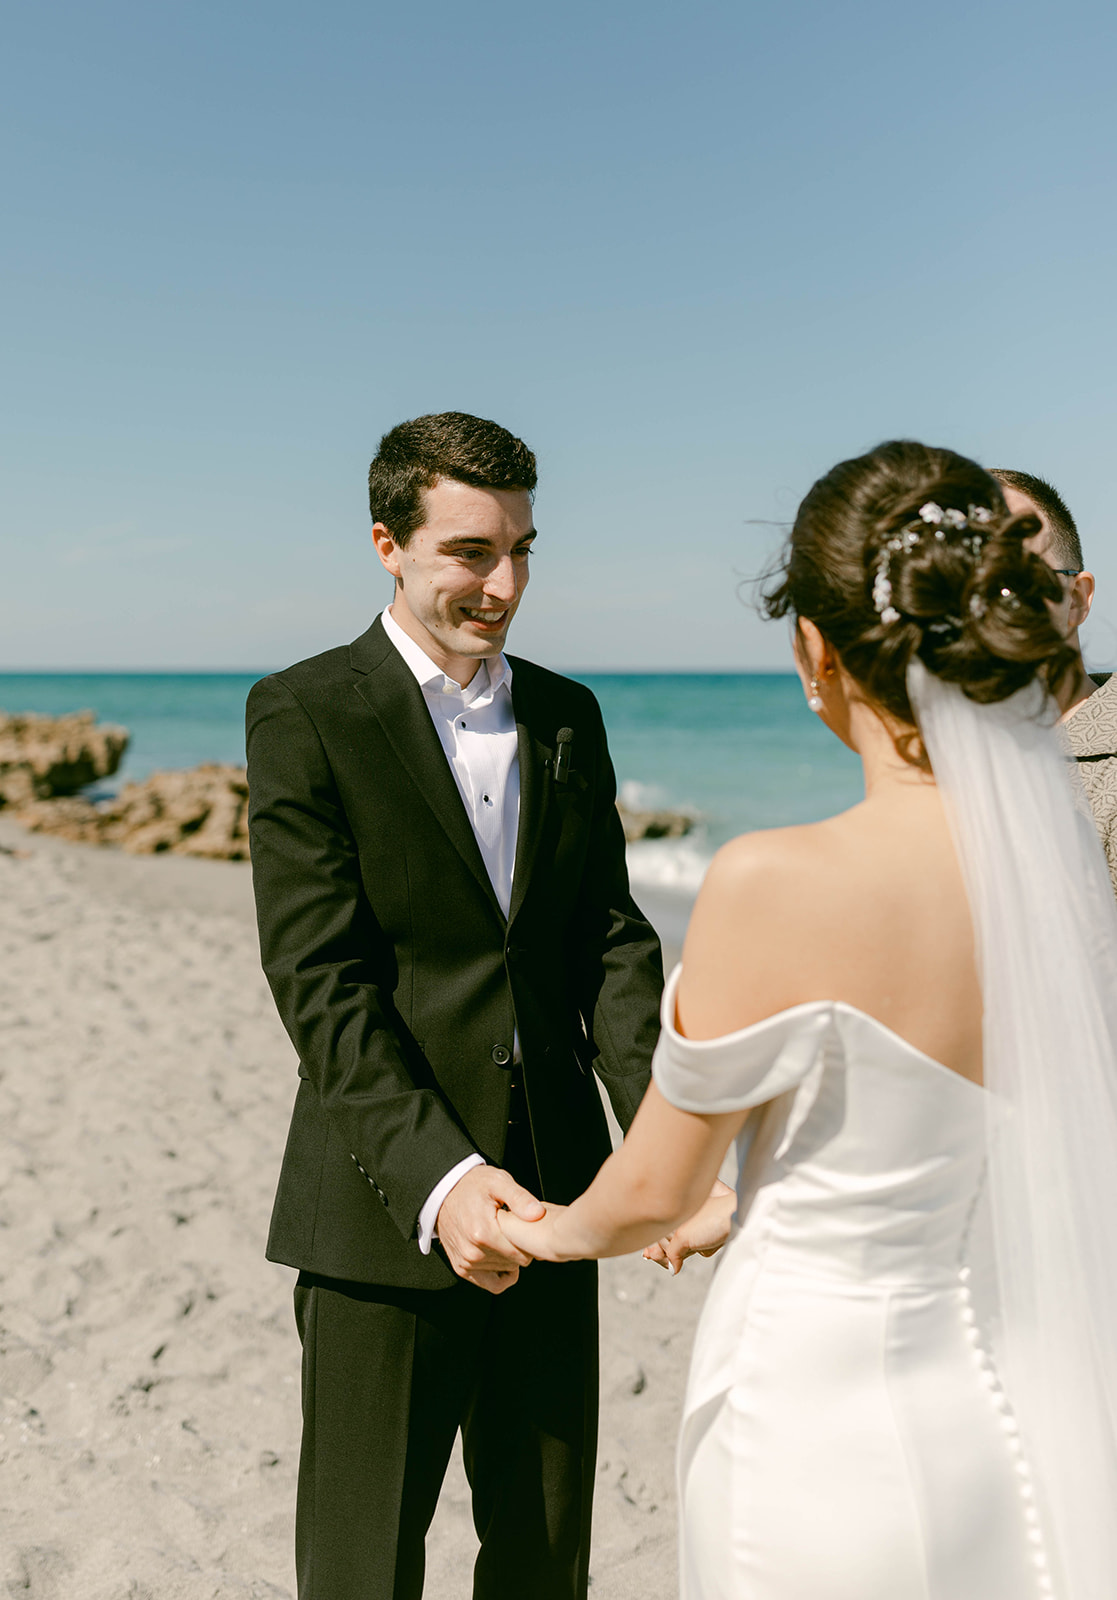 Groom smiles at bride during Palm Beach, Florida intimate wedding ceremony